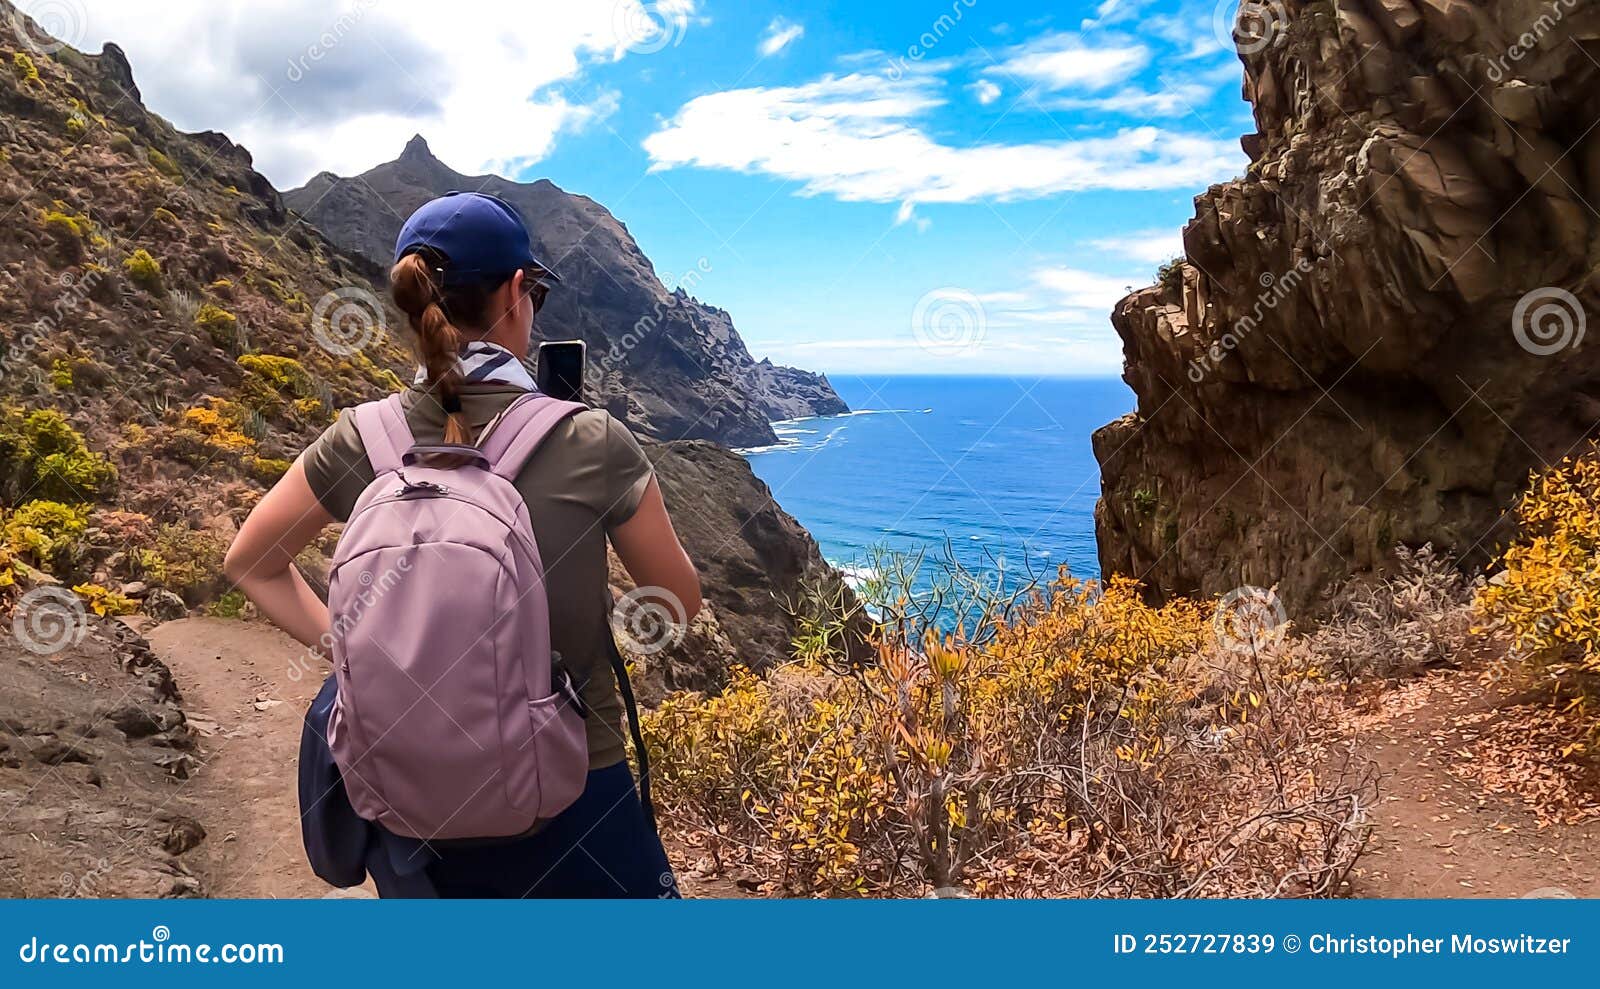 hiking woman taking picture of scenic view of coastline of anaga mountain range on tenerife, canary islands, spain, europe